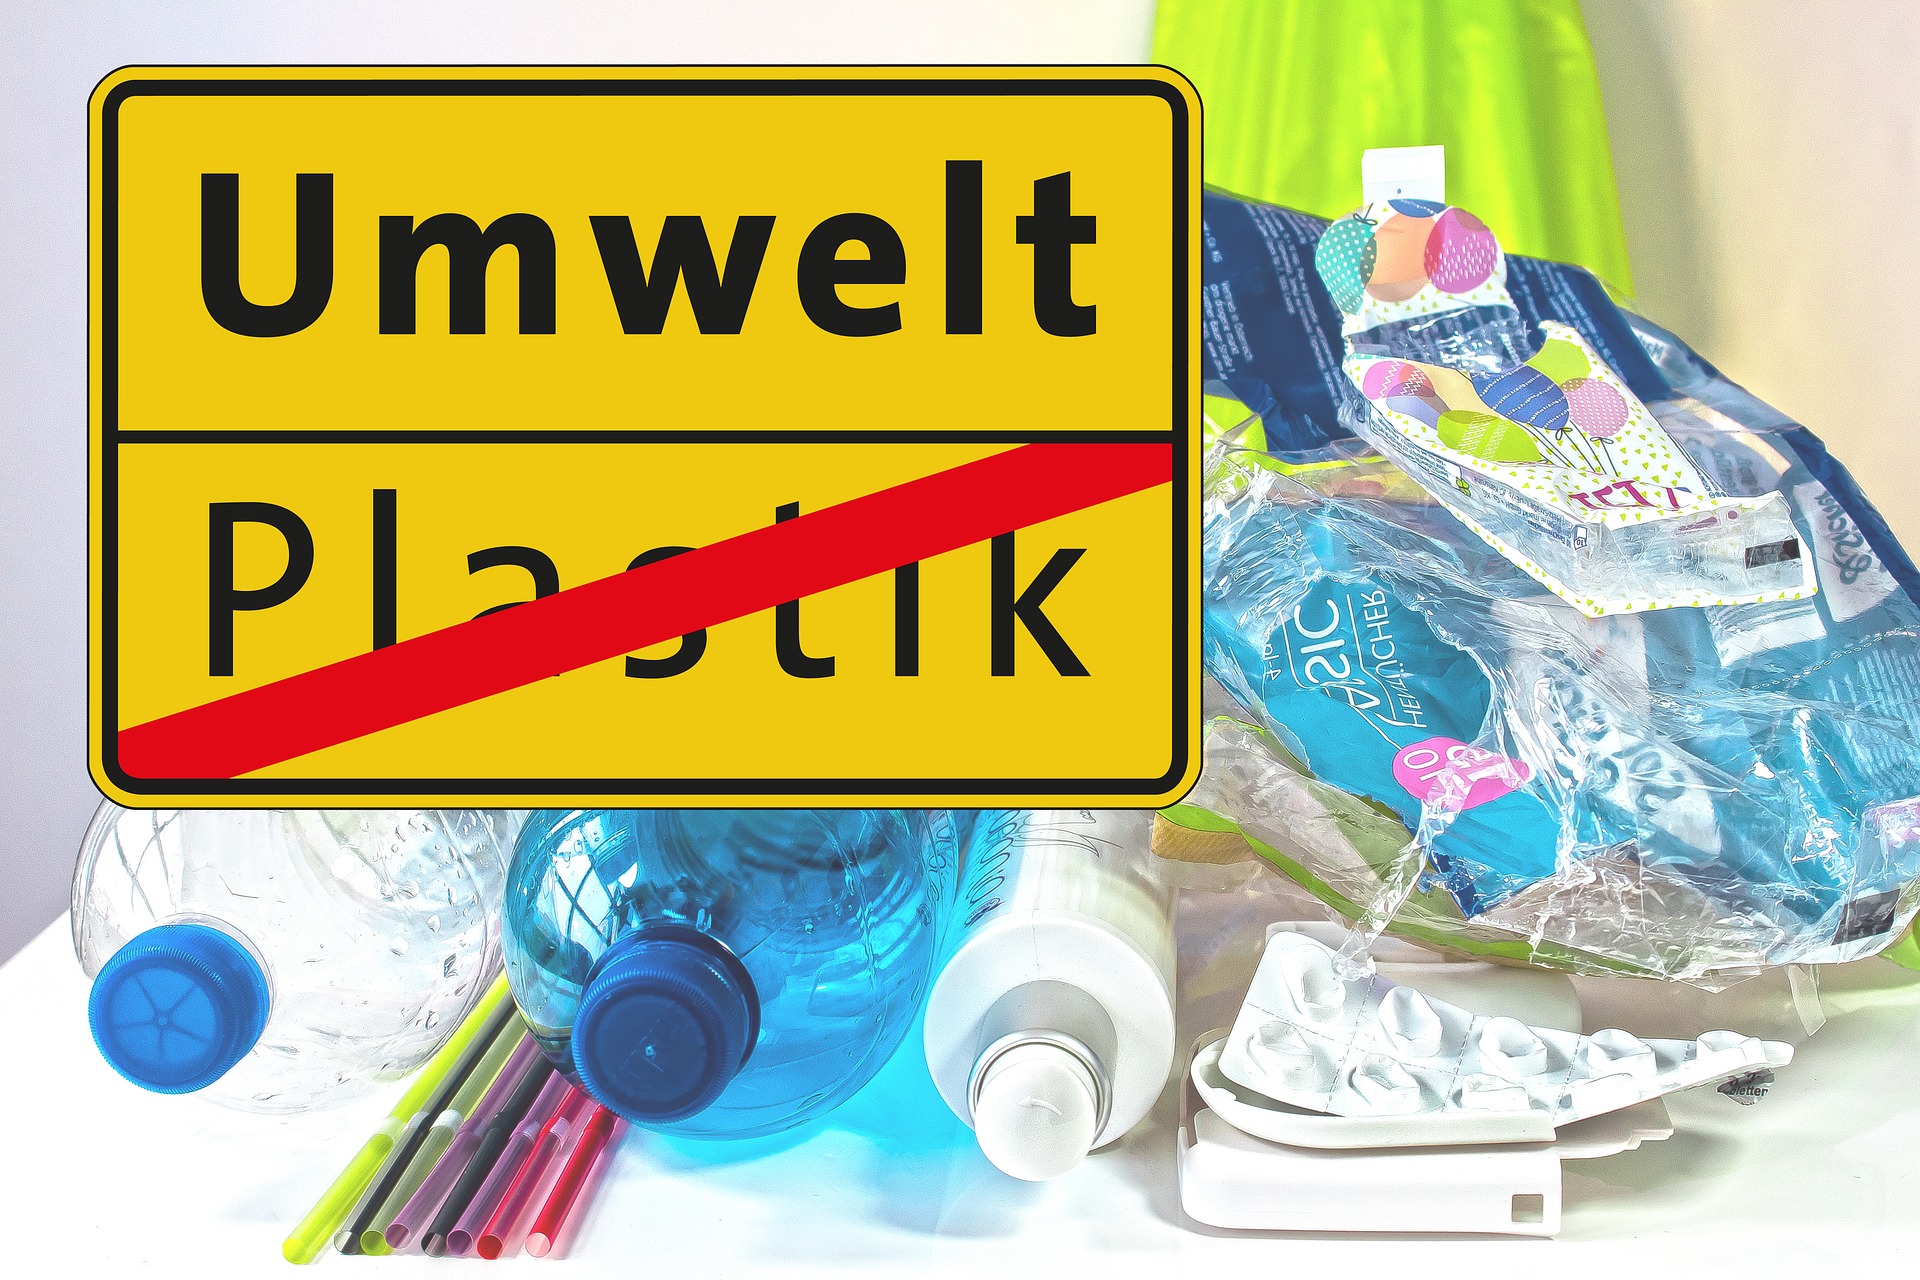 a picture of plastics and sign (Umwelt - Plastik) and Plastik is crossed out